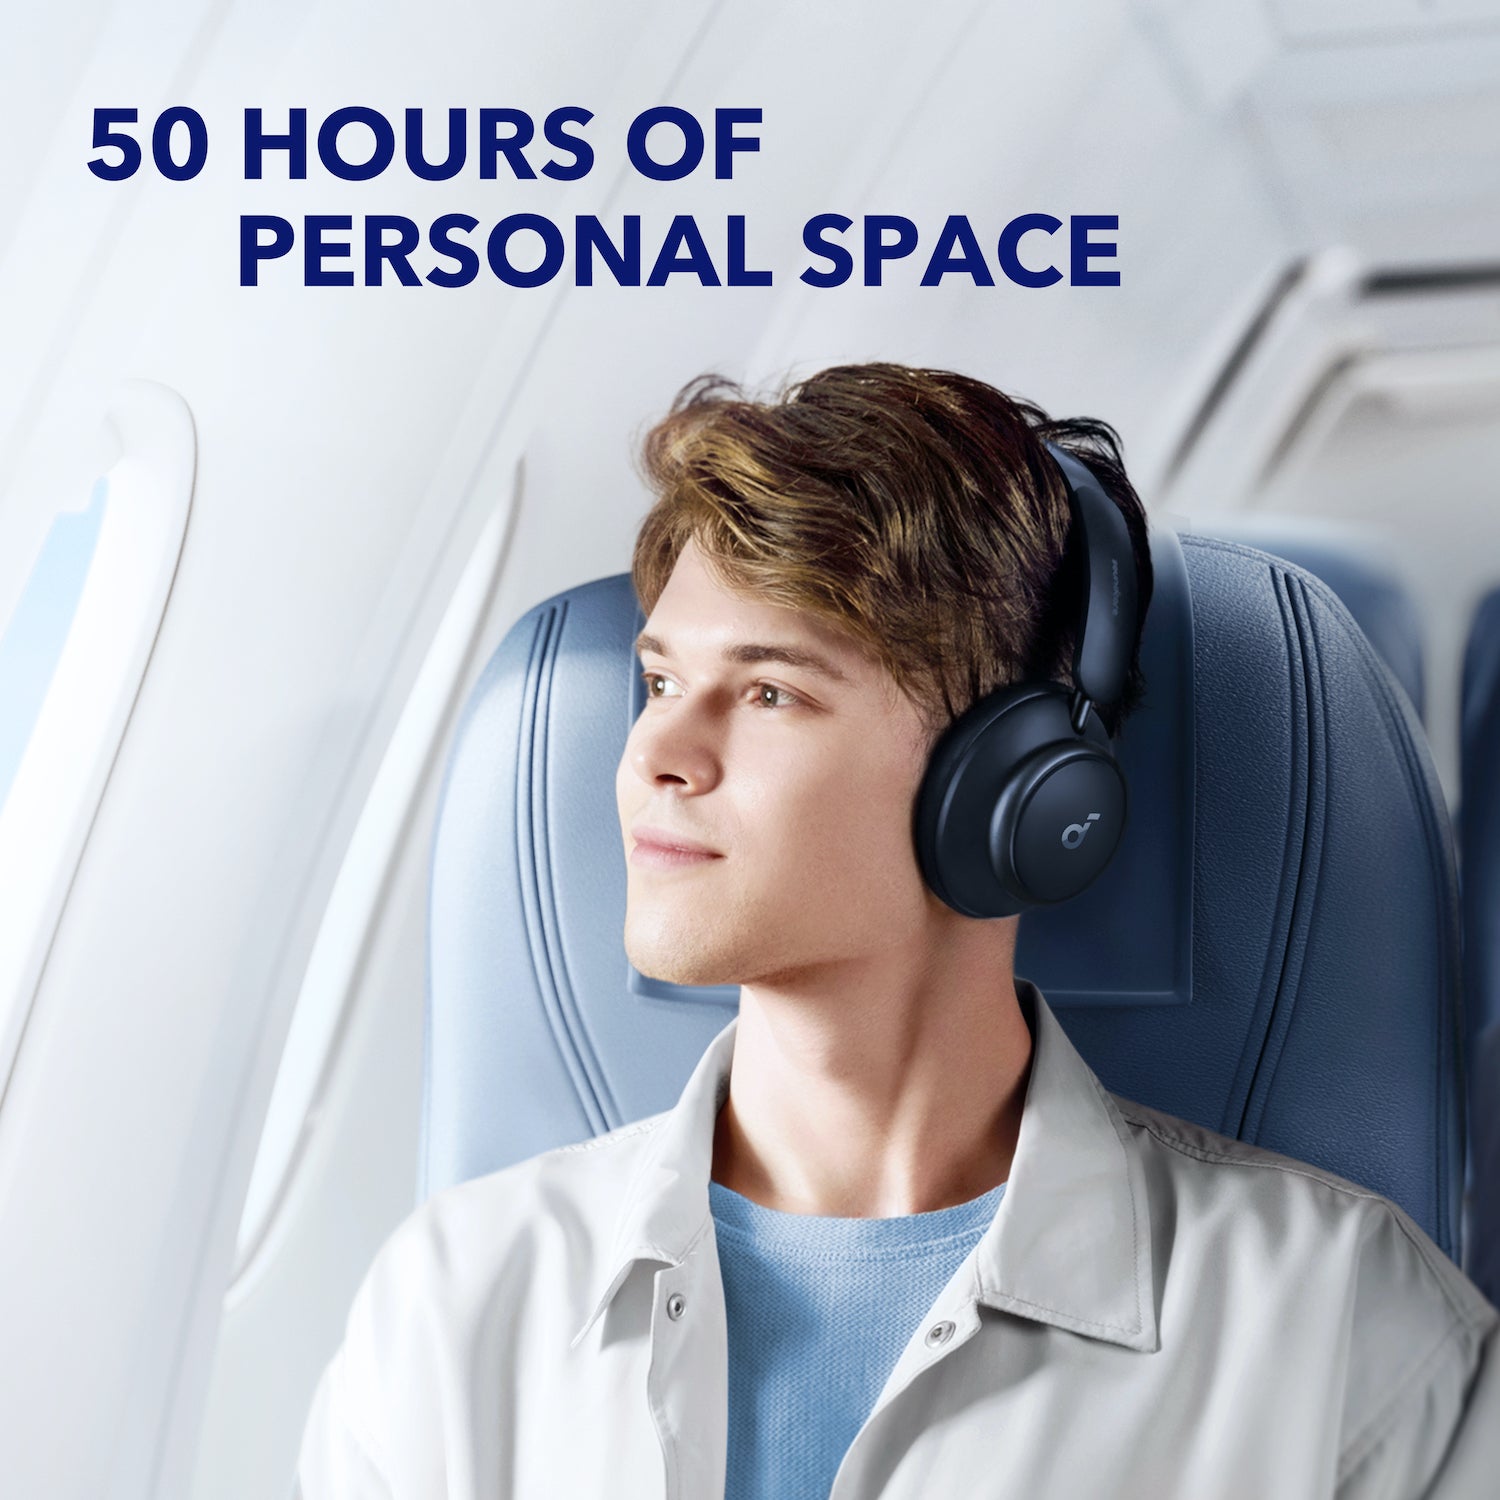 Buy Space Q45 All-New Noise Cancelling Headphones - soundcore US